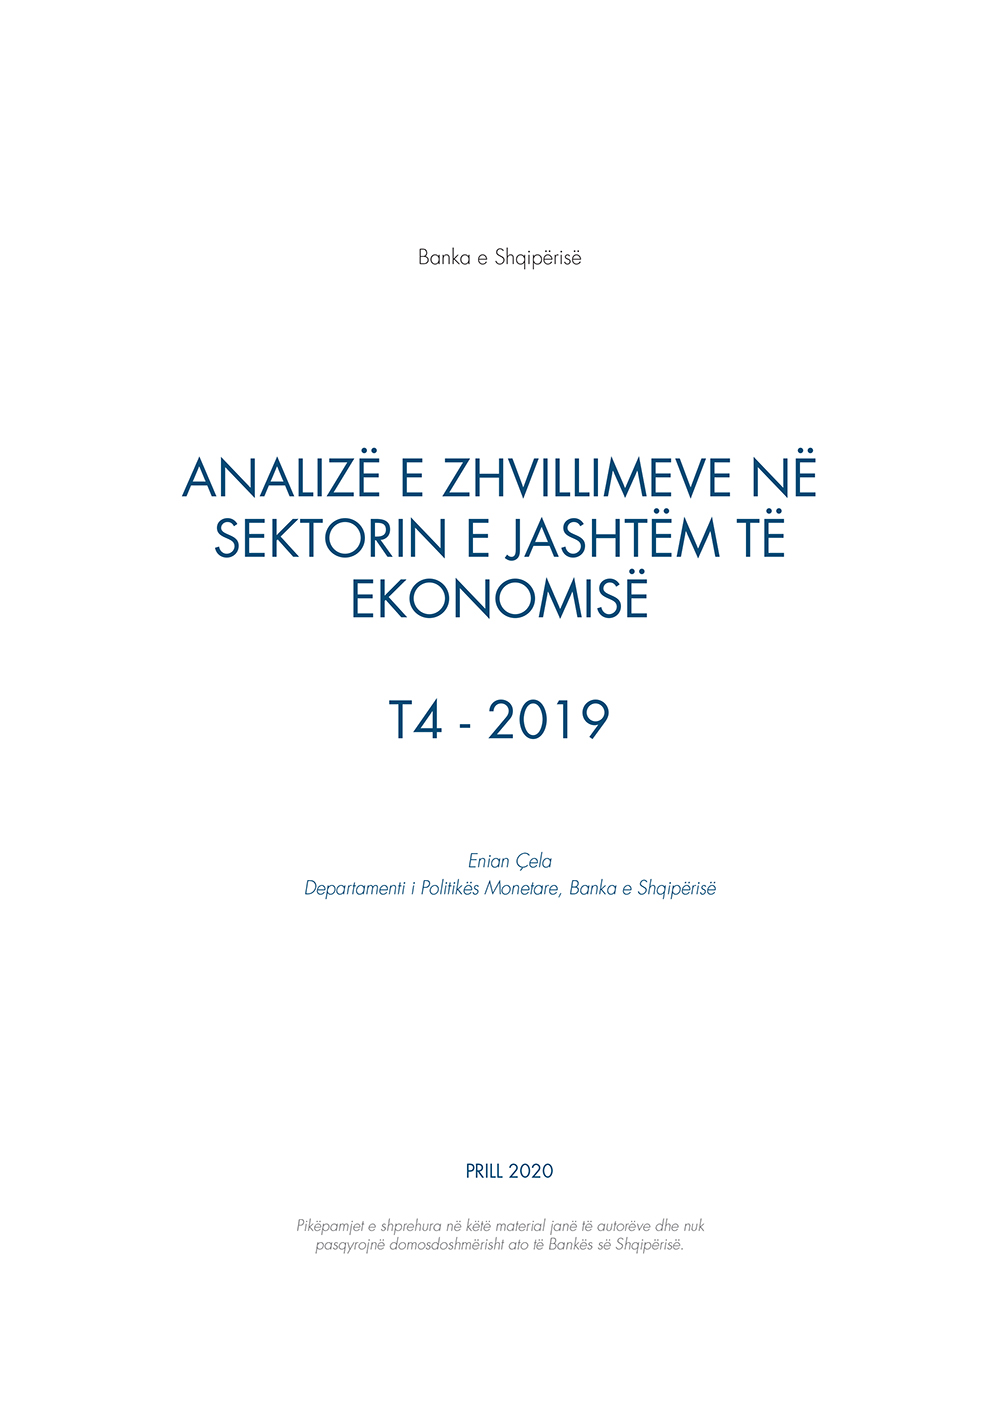 Analysis of developments in the external sector of the economy 2019 Q4